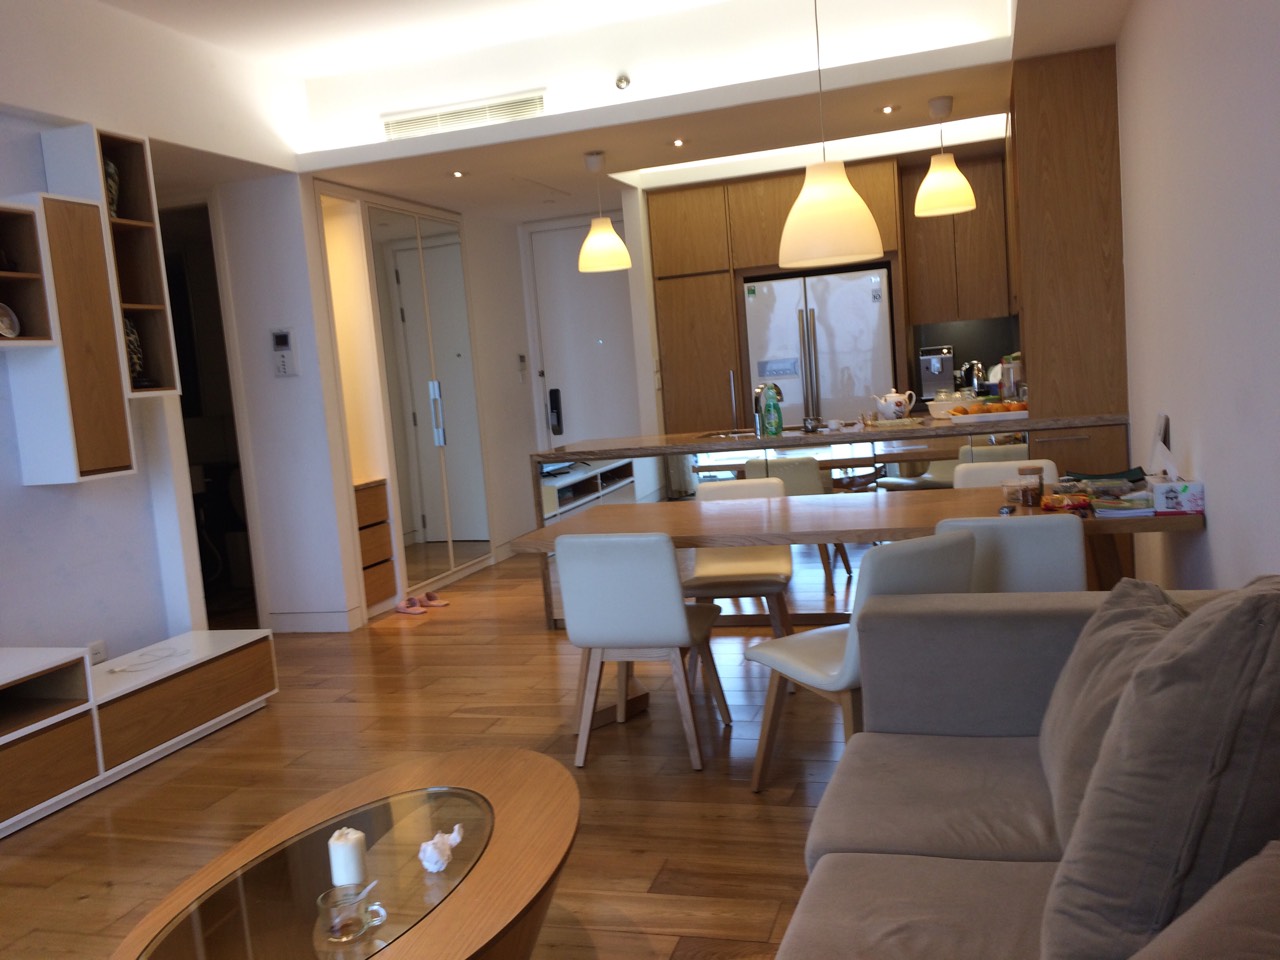 Nice apartment Indochina Plaza for rent, east building, Xuan Thuy Street, Cau Giay District, Hanoi 